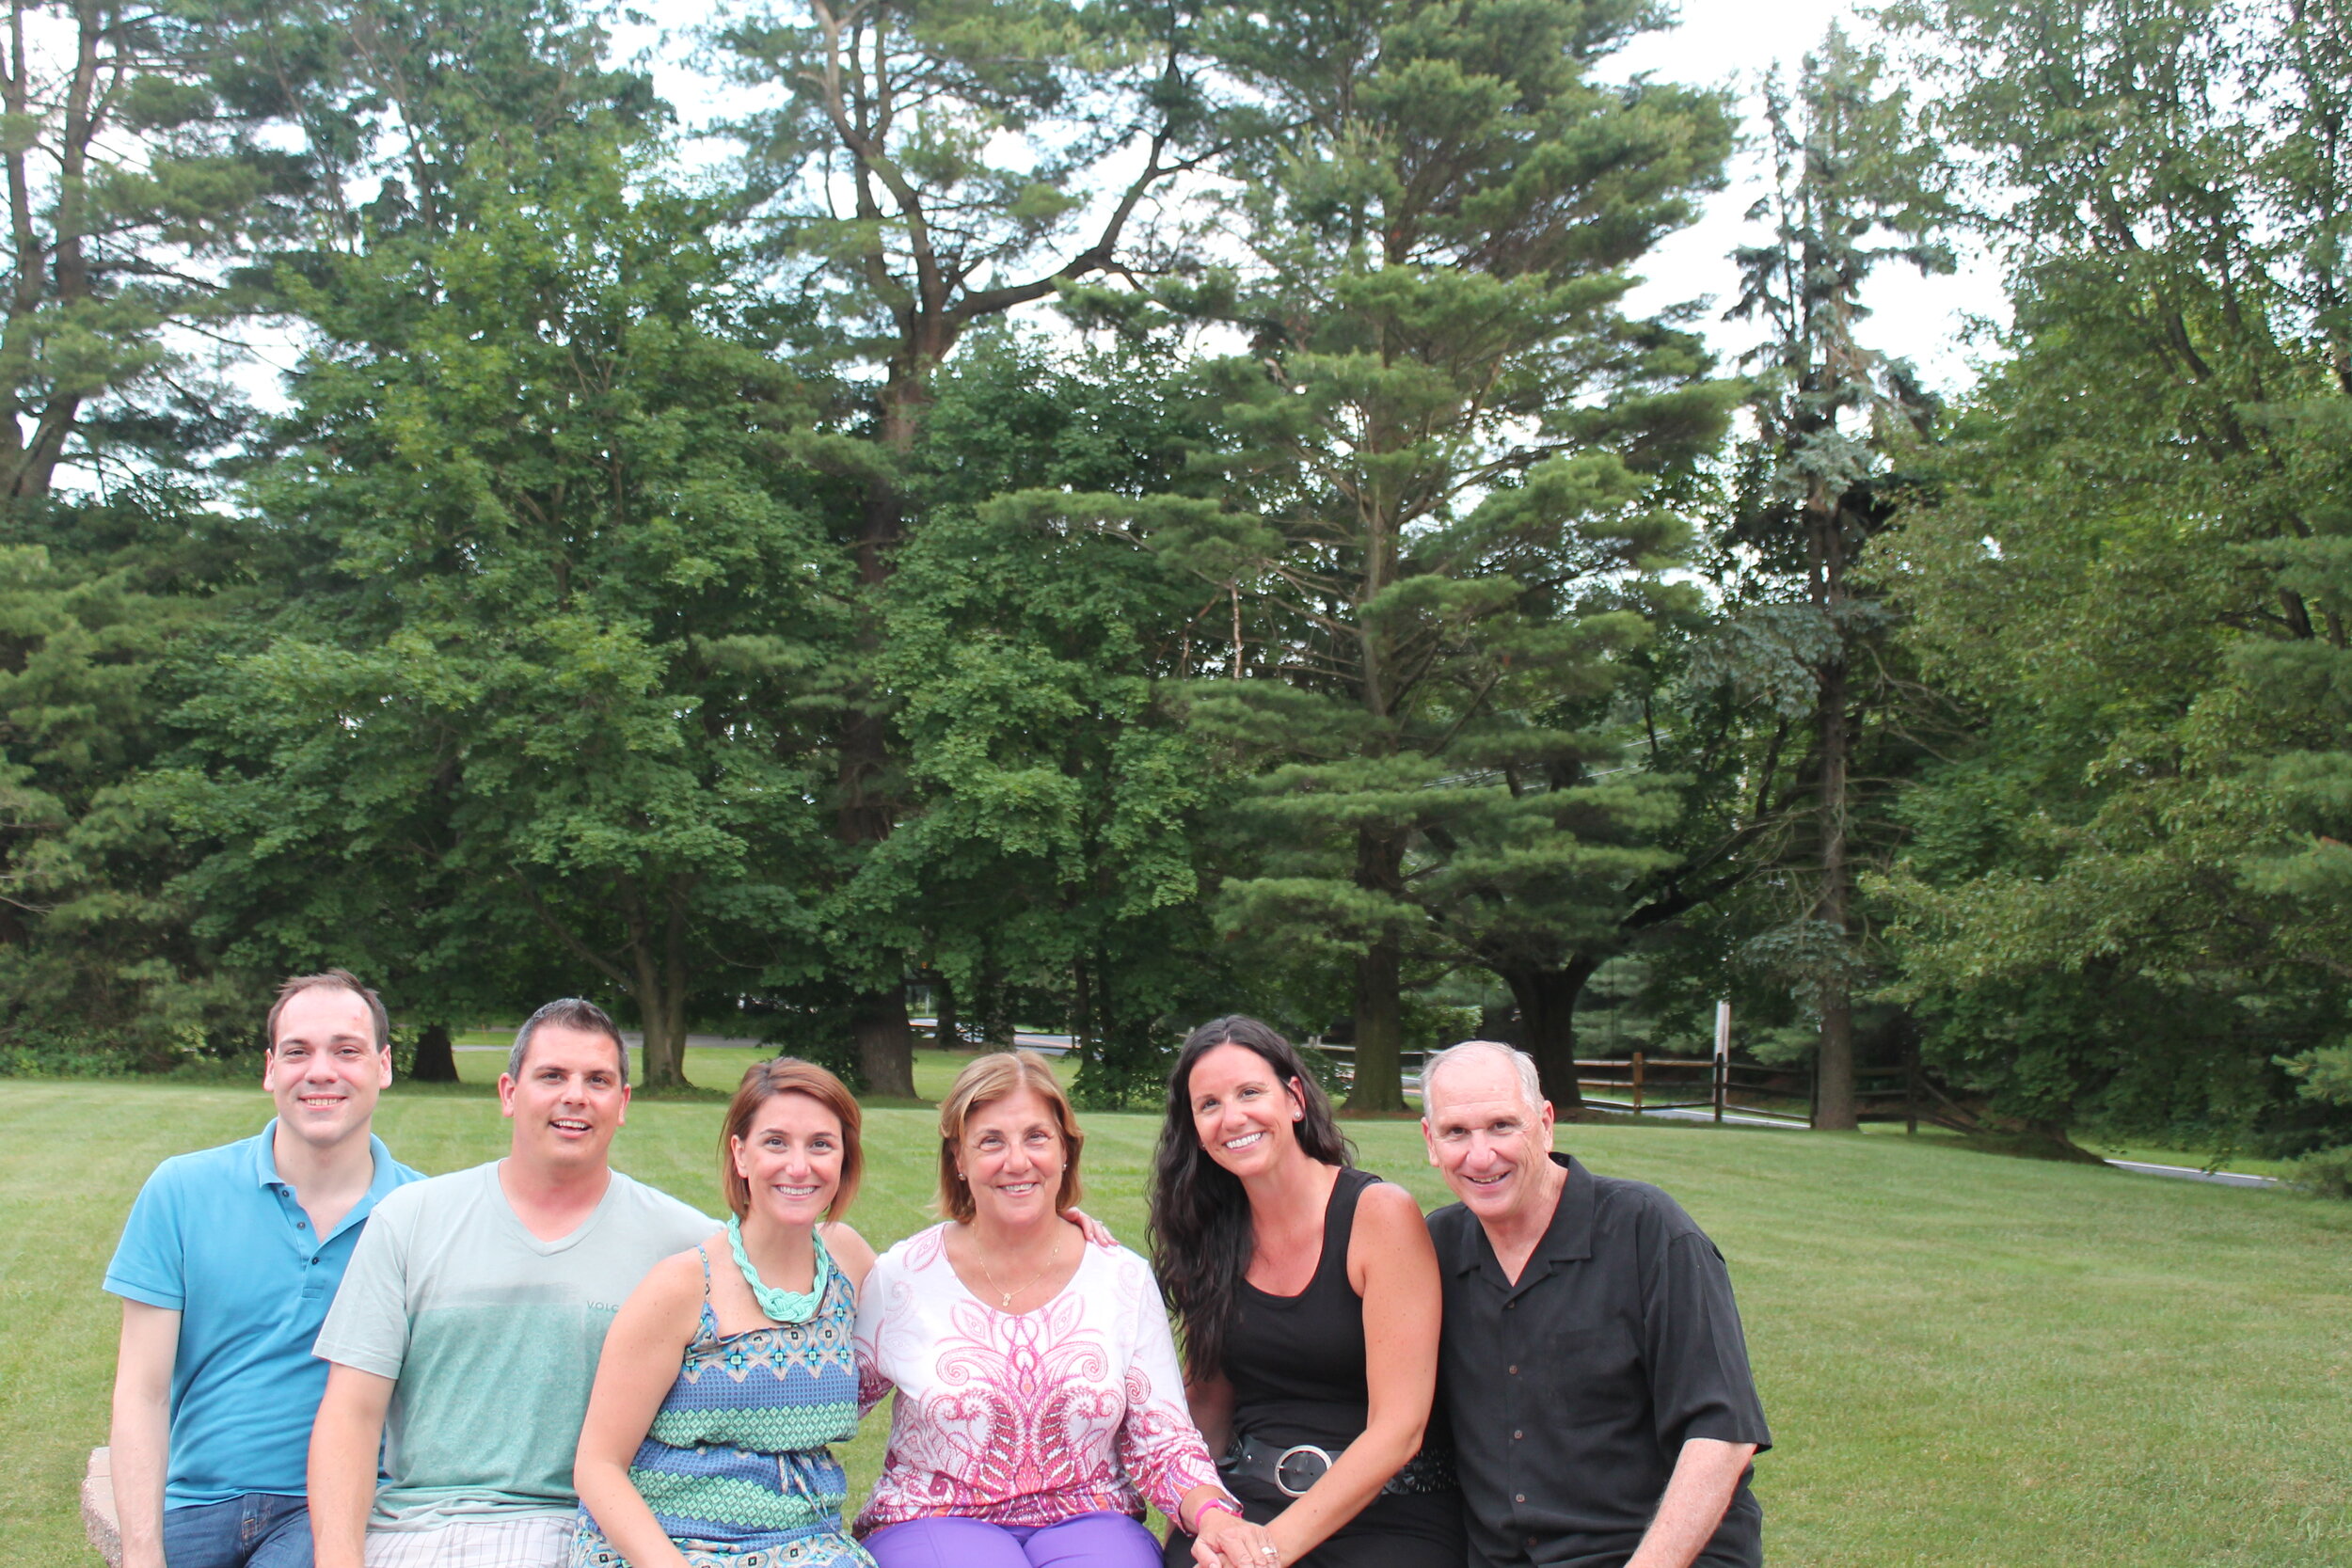 The Deery family (from left): Gerry, Michael, Chrissy, Rosemary, Mary Beth and Gerry.